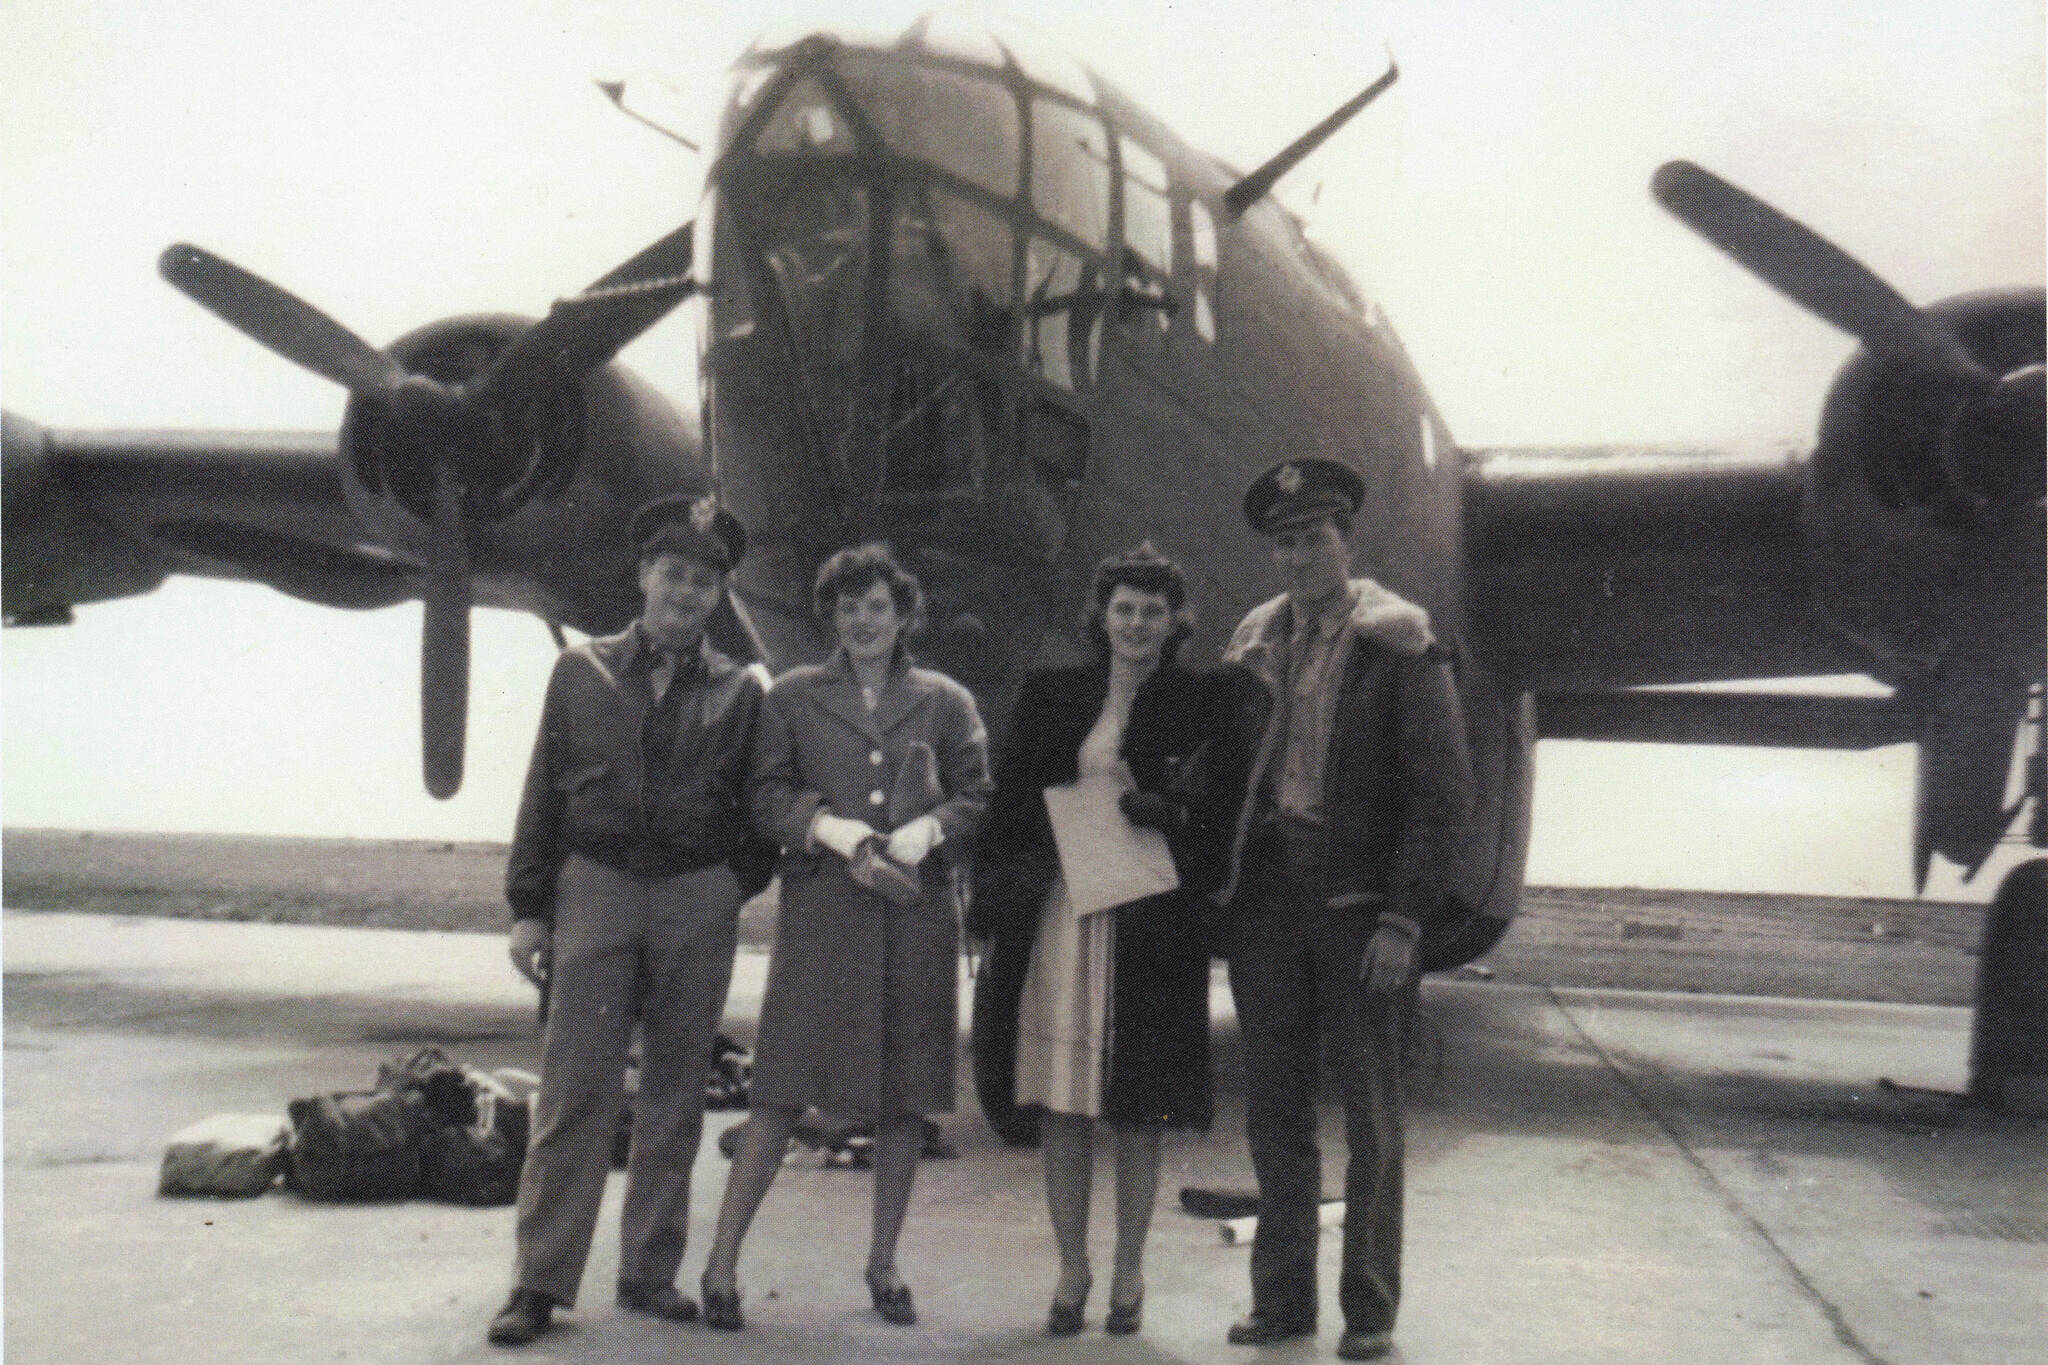 Larry and Rusty Lancashire (at left) pose in front of a B-24 bomber in the early 1940s with another unidentified couple. Larry was a B-24 co-pilot during World War II. (Photo courtesy of the Lancashire Family Collection)
Larry and Rusty Lancashire (at left) pose in front of a B-24 bomber in the early 1940s with another unidentified couple. Larry was a B-24 co-pilot during World War II. (Photo courtesy of the Lancashire Family Collection)